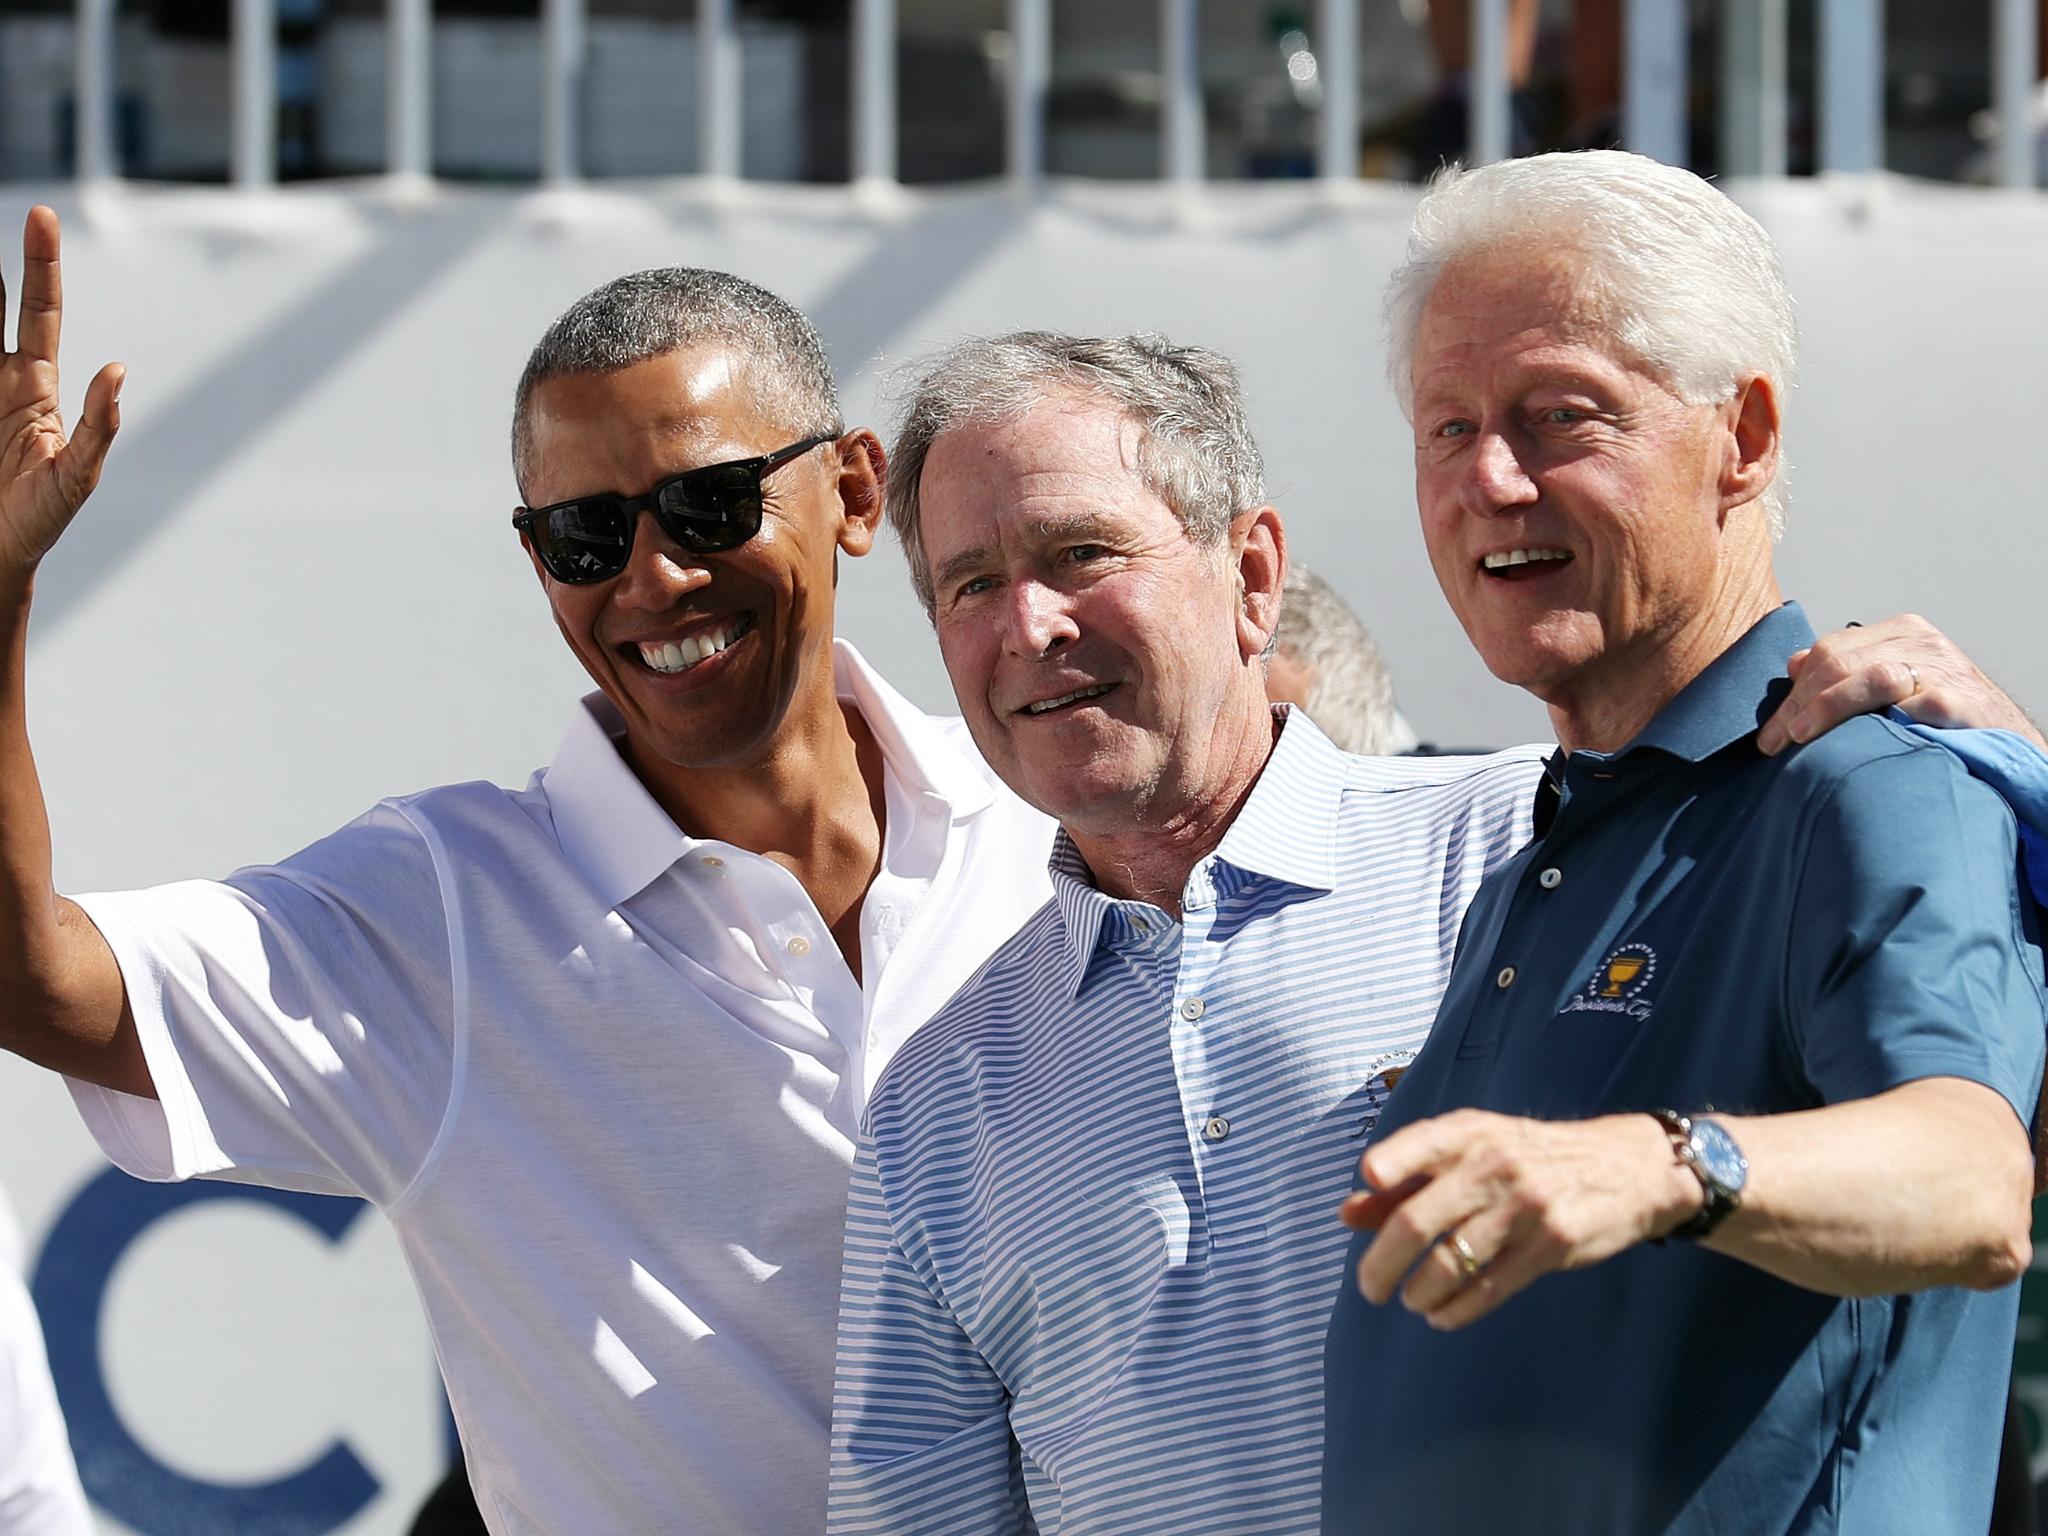 Former US Presidents Barack Obama, George W. Bush, and Bill Clinton attend the Presidents Cup at Liberty National Golf Club on 28 September Jersey City, New Jersey.